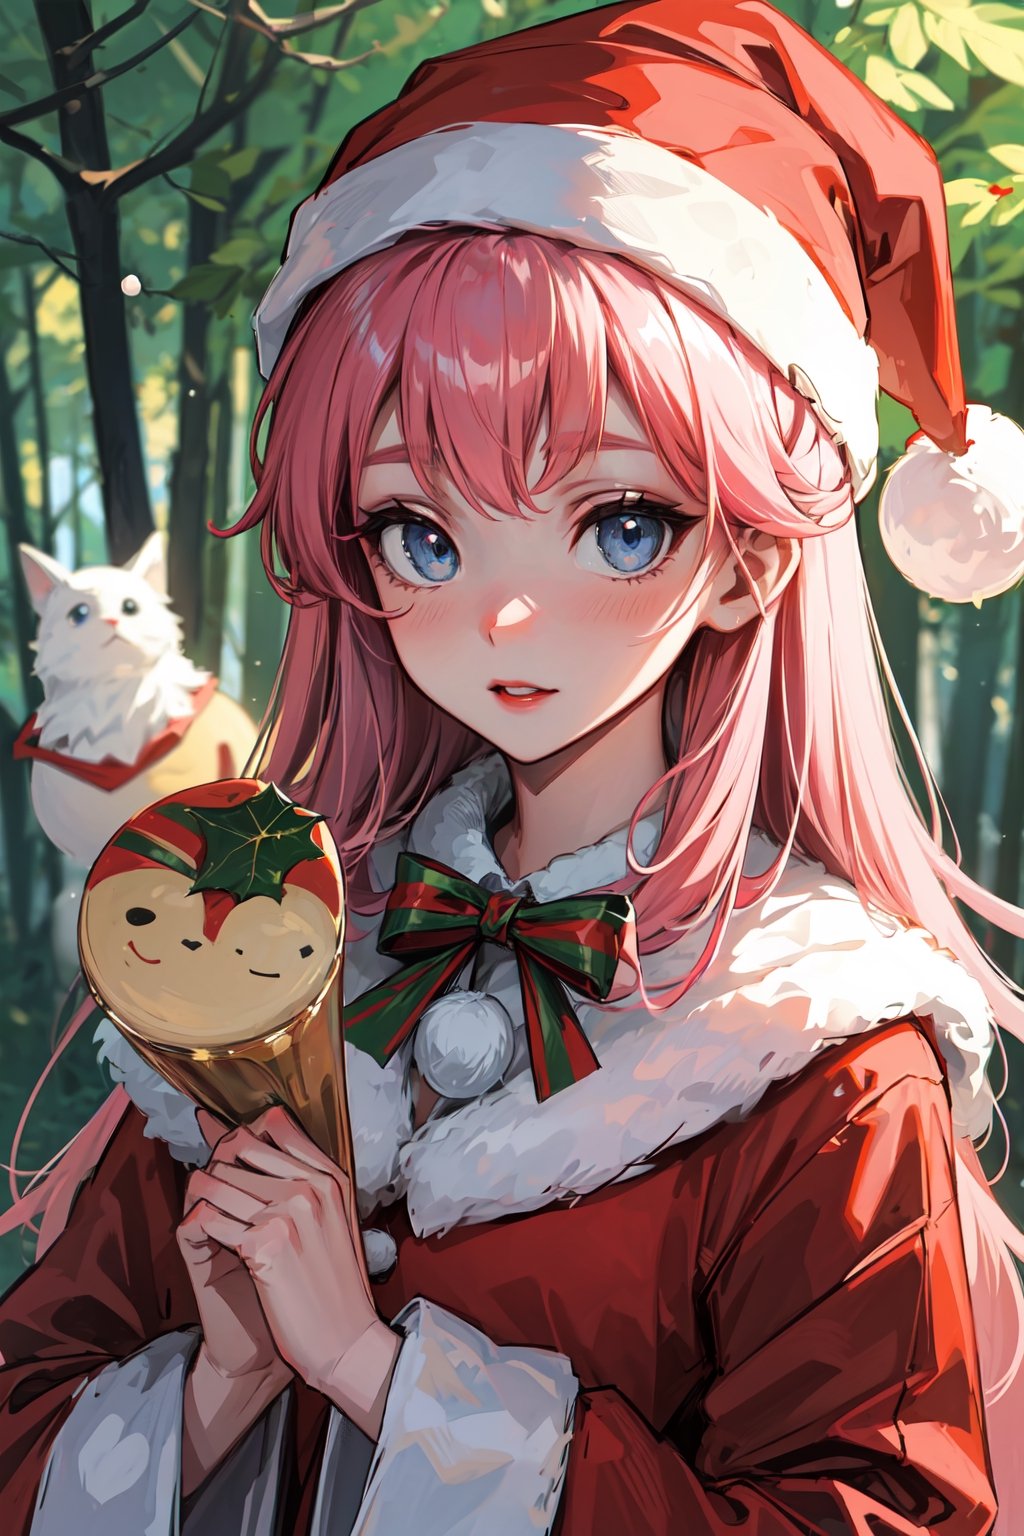 A cute girl with pink hair, blue eyes, pale skin, red lips wearing a Santa hat and Christmas clothes holding various presents in a forest with various animals around her